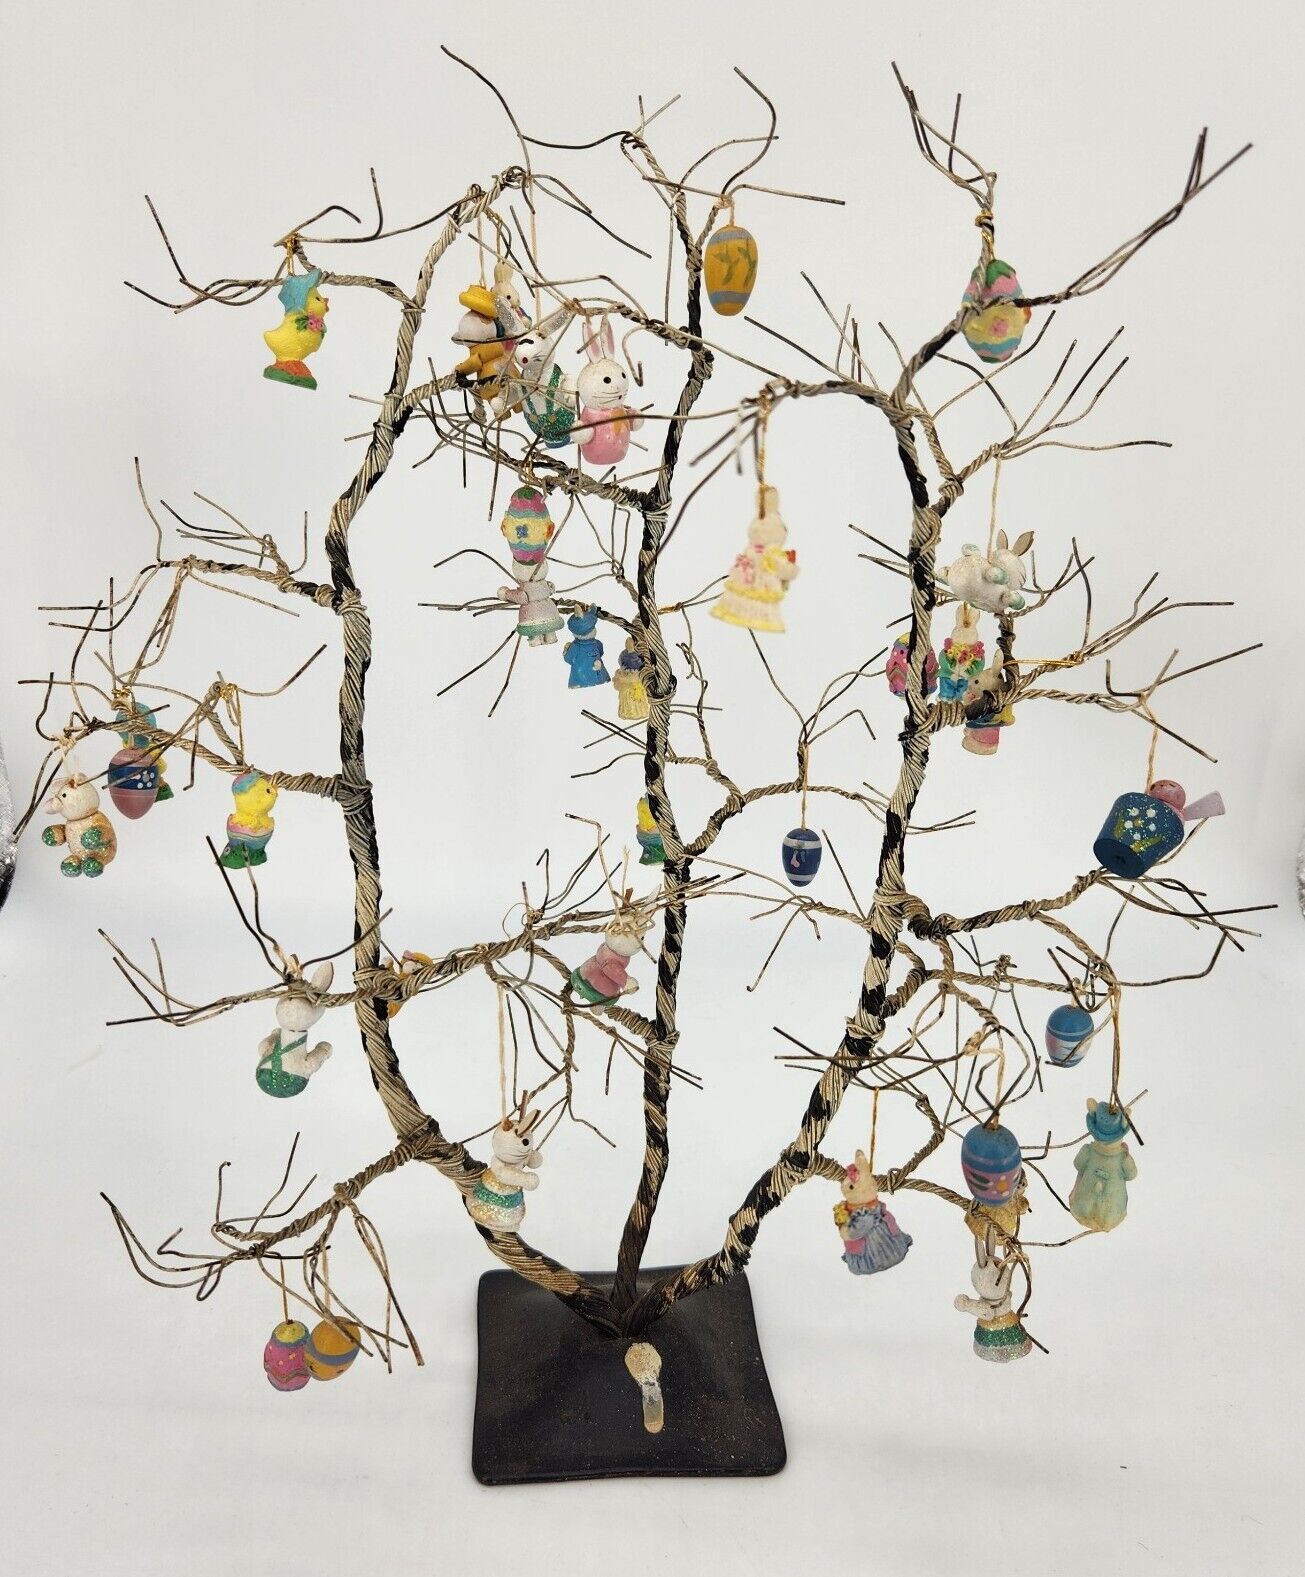 VTG Handmade Twisted Strands of Metal Tree Sculpture with Mini Easter Ornaments